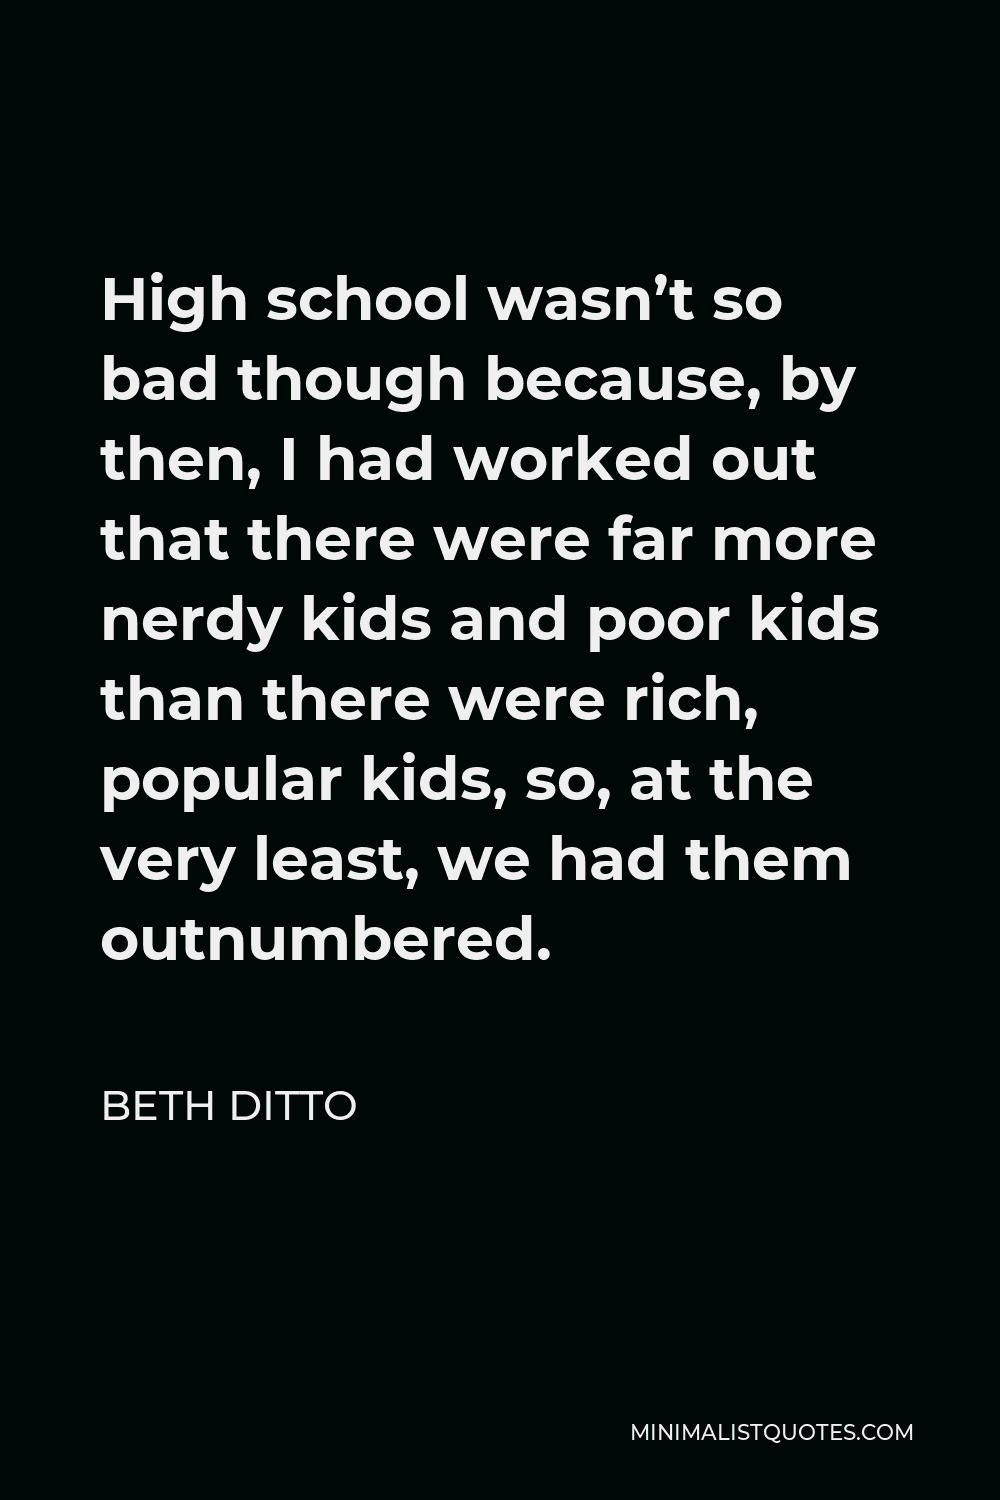 Beth Ditto Quote: High school wasn't so bad though because, by then, I had  worked out that there were far more nerdy kids and poor kids than there  were rich, popular kids